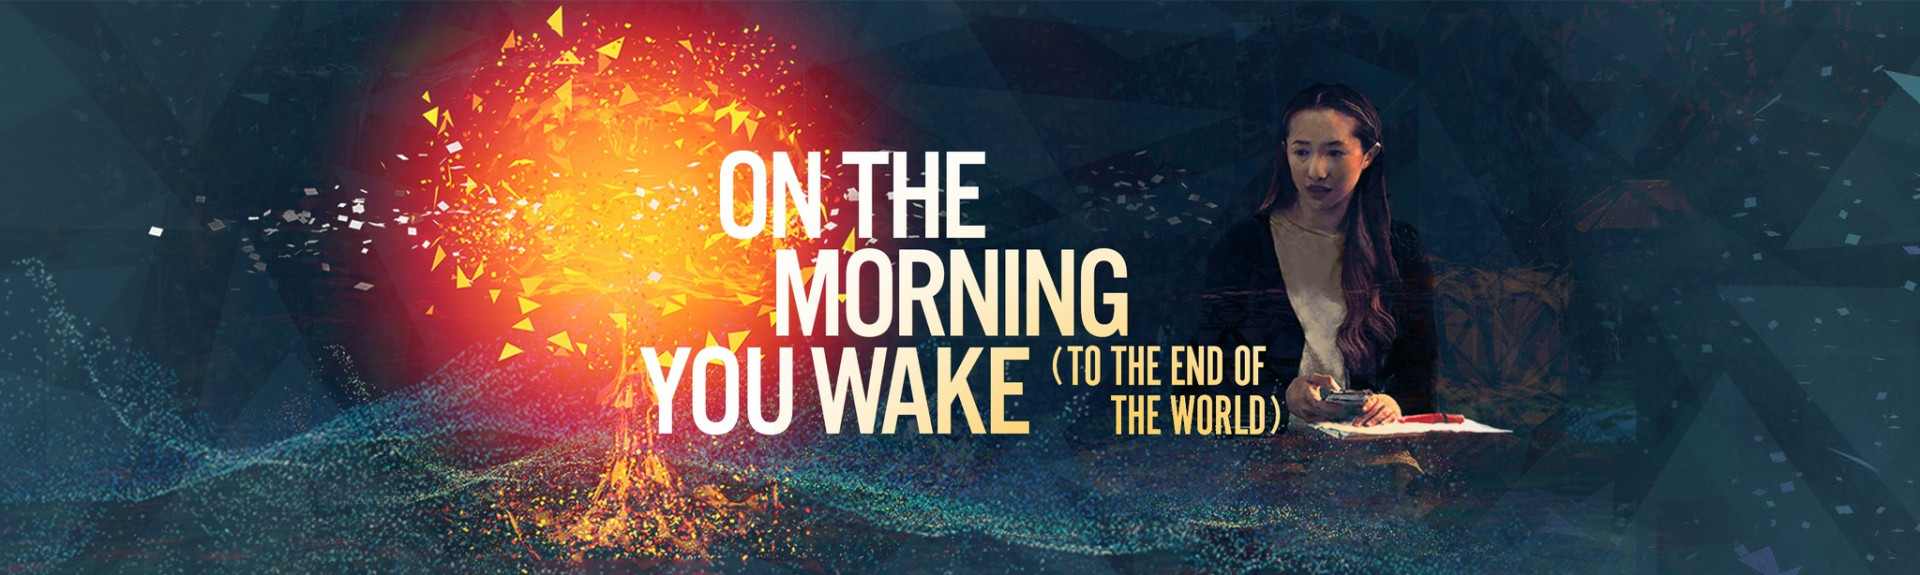 On The Morning You Wake